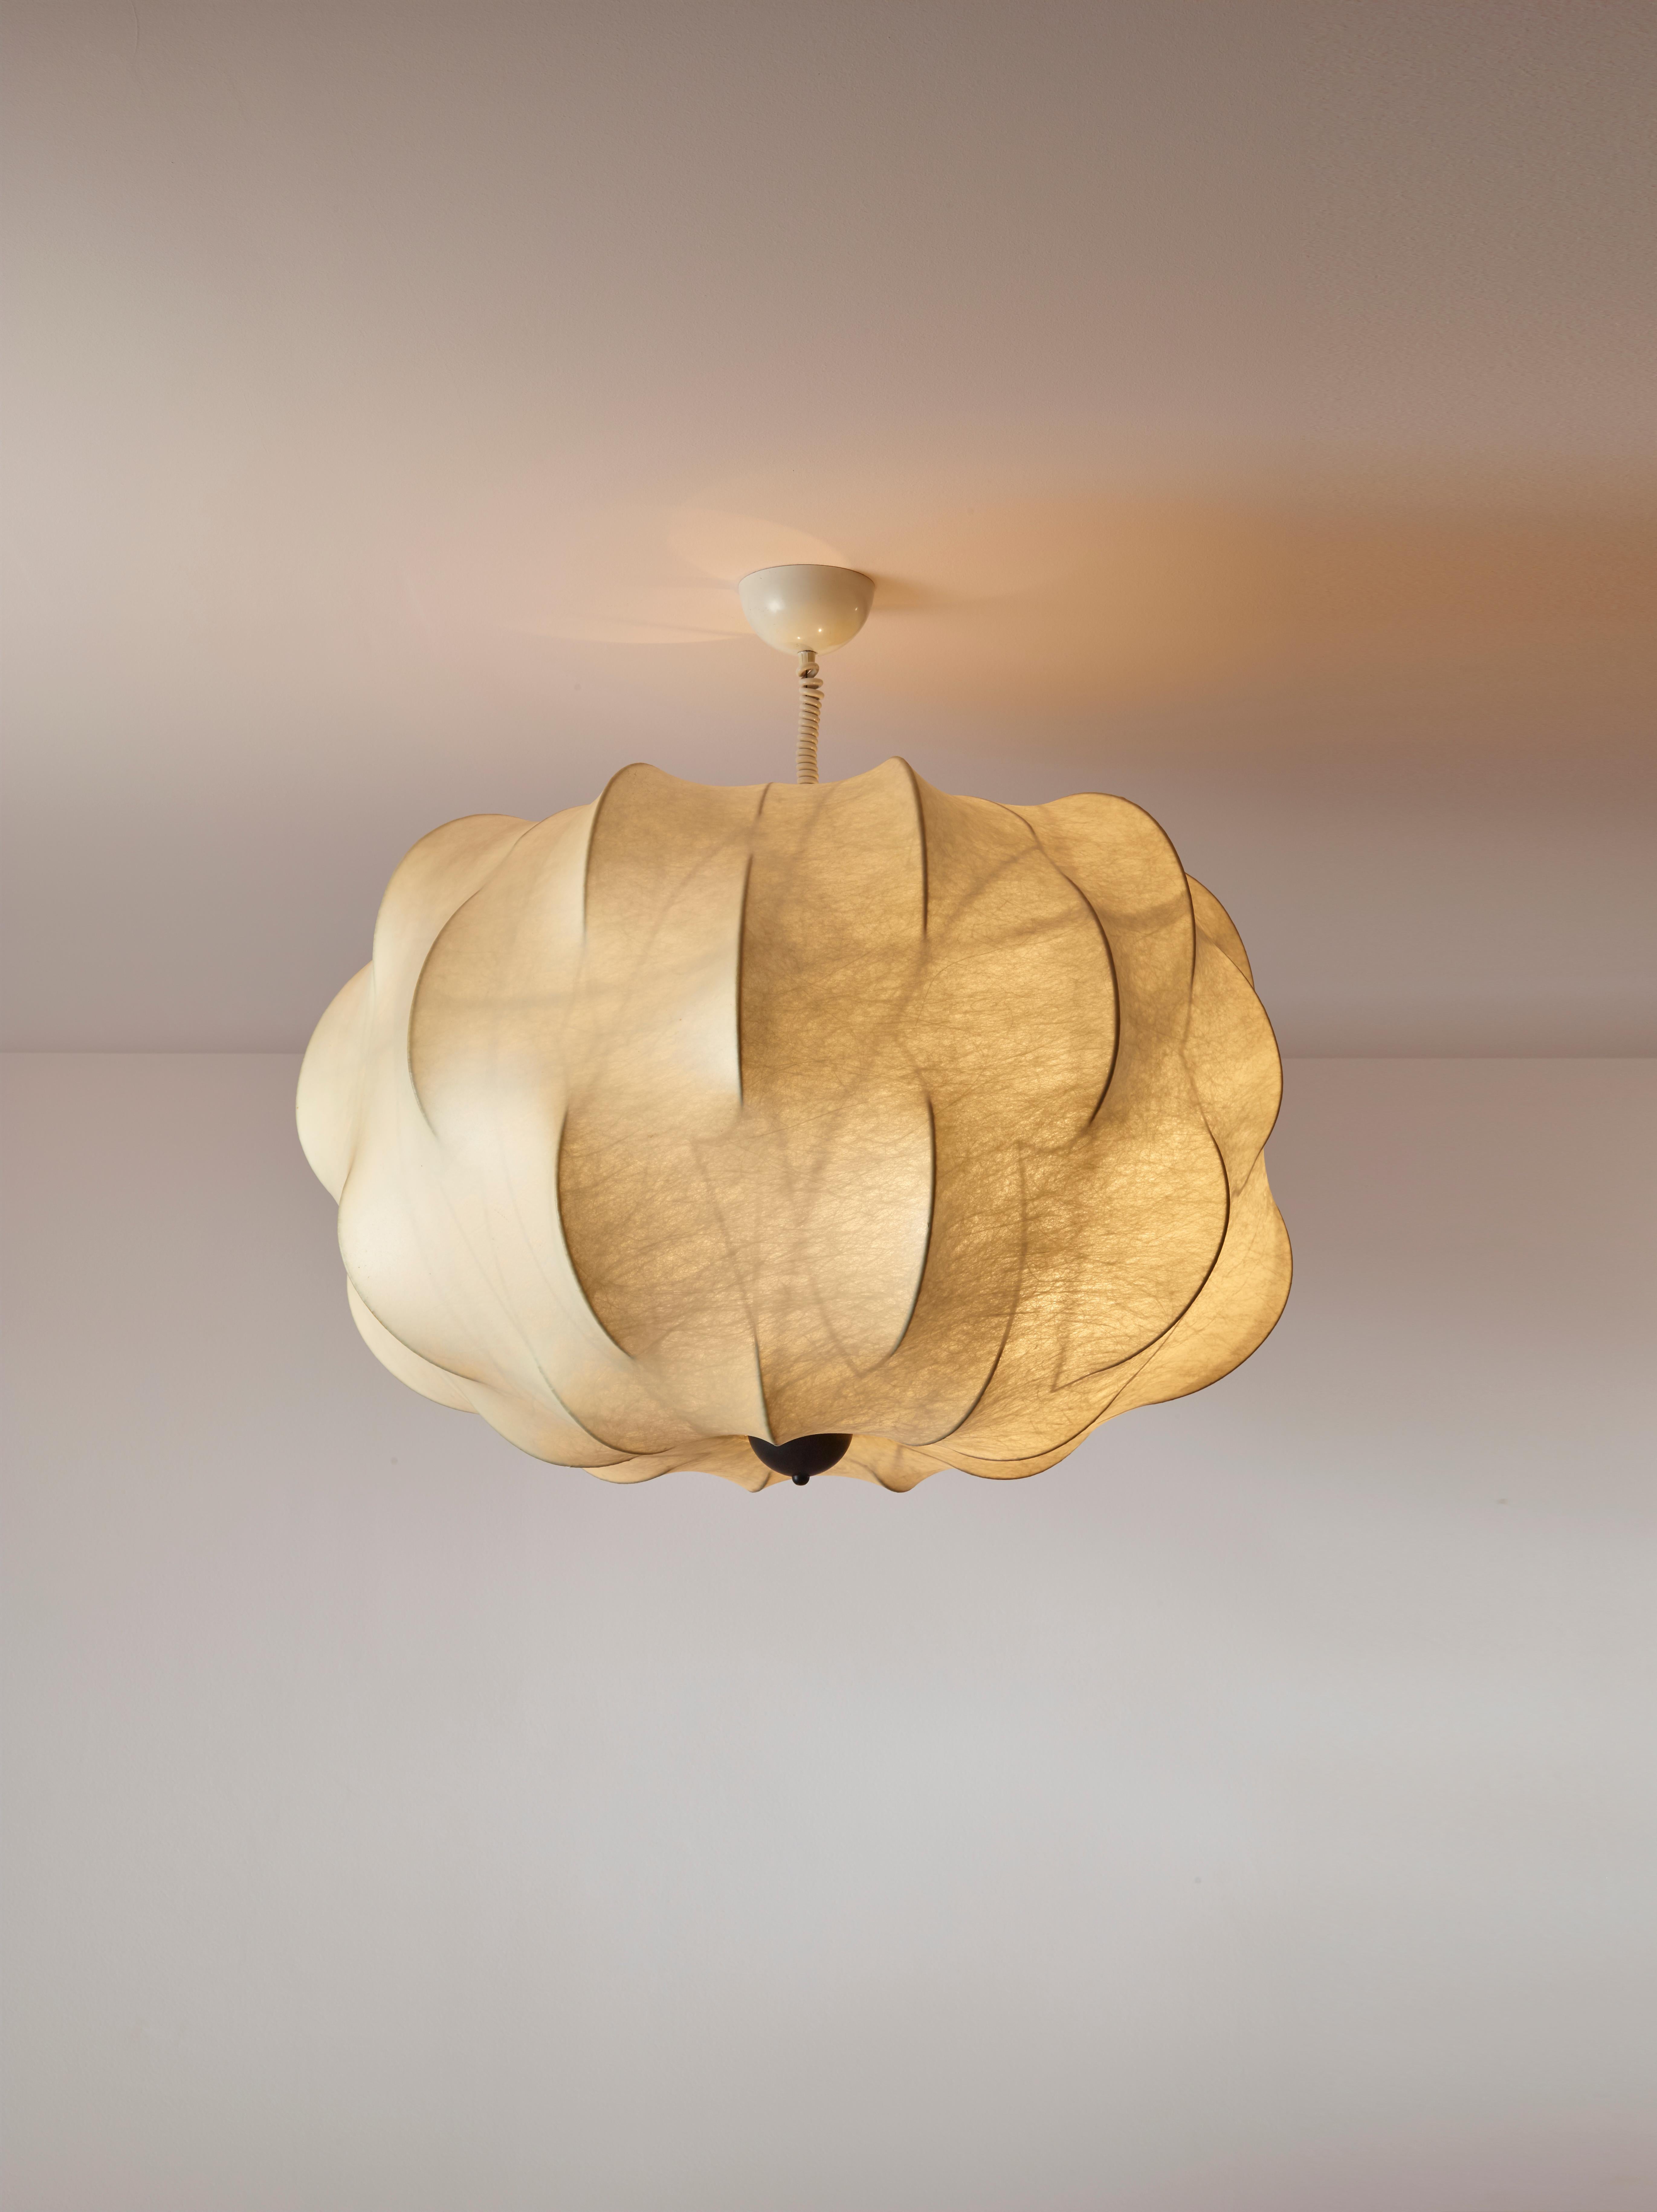 A large cocoon Nuvola chandelier by Tobia Scarpa for Flos designed in the 1962 and crafted in the early 1970s.

In the realm of mid-century modern design, few pieces encapsulate the era's essence quite like the Nuvola pendant light by Tobia Scarpa